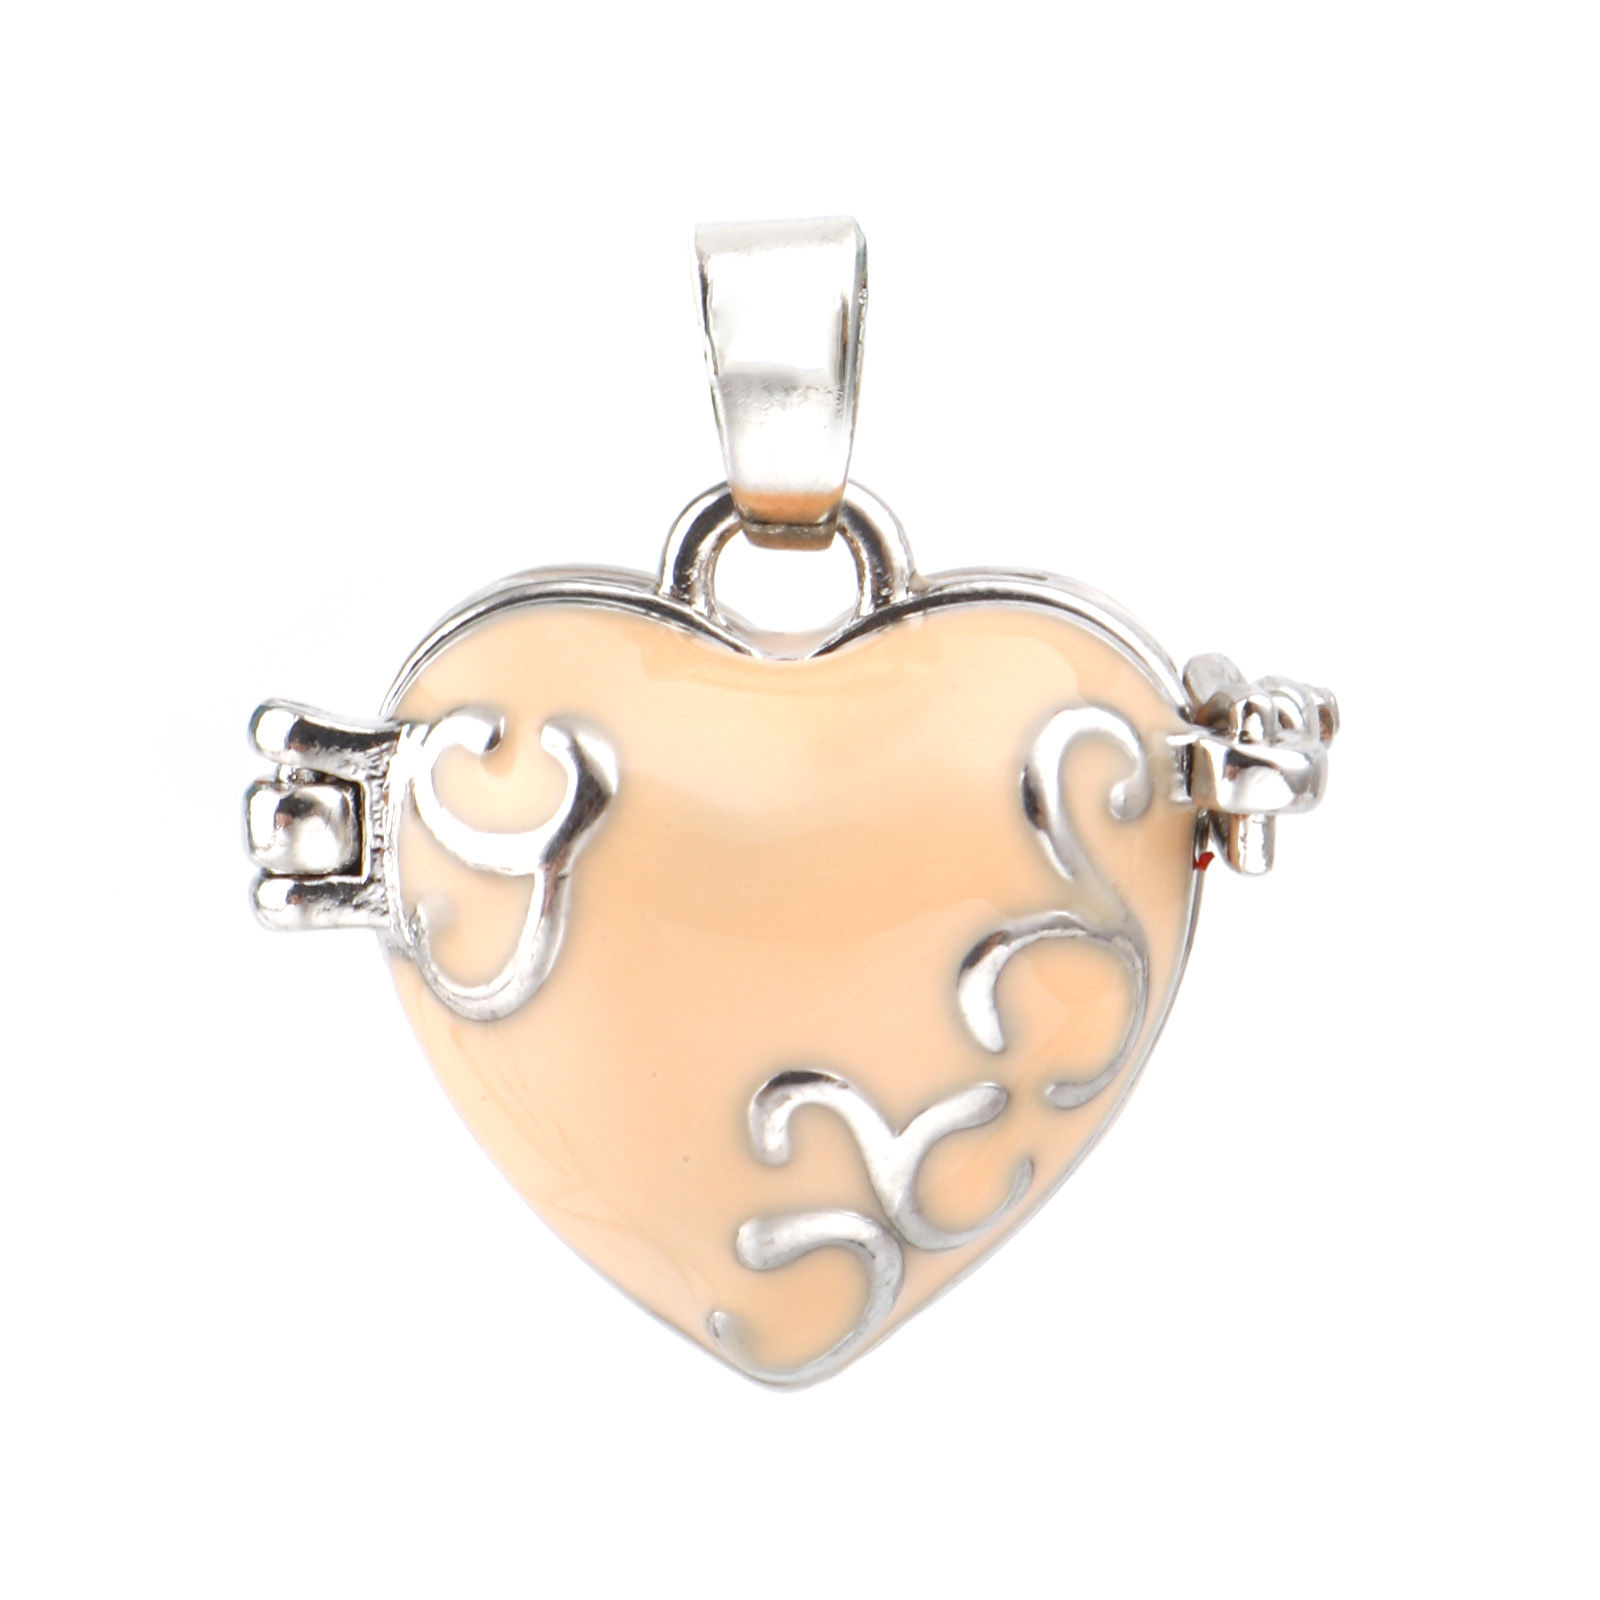 Picture of Copper Charms Mexican Angel Caller Bola Harmony Ball Wish Box Locket Heart Carved Pattern Silver Tone Peachy Beige Enamel Can Open 25mm x 21mm, 1 Piece